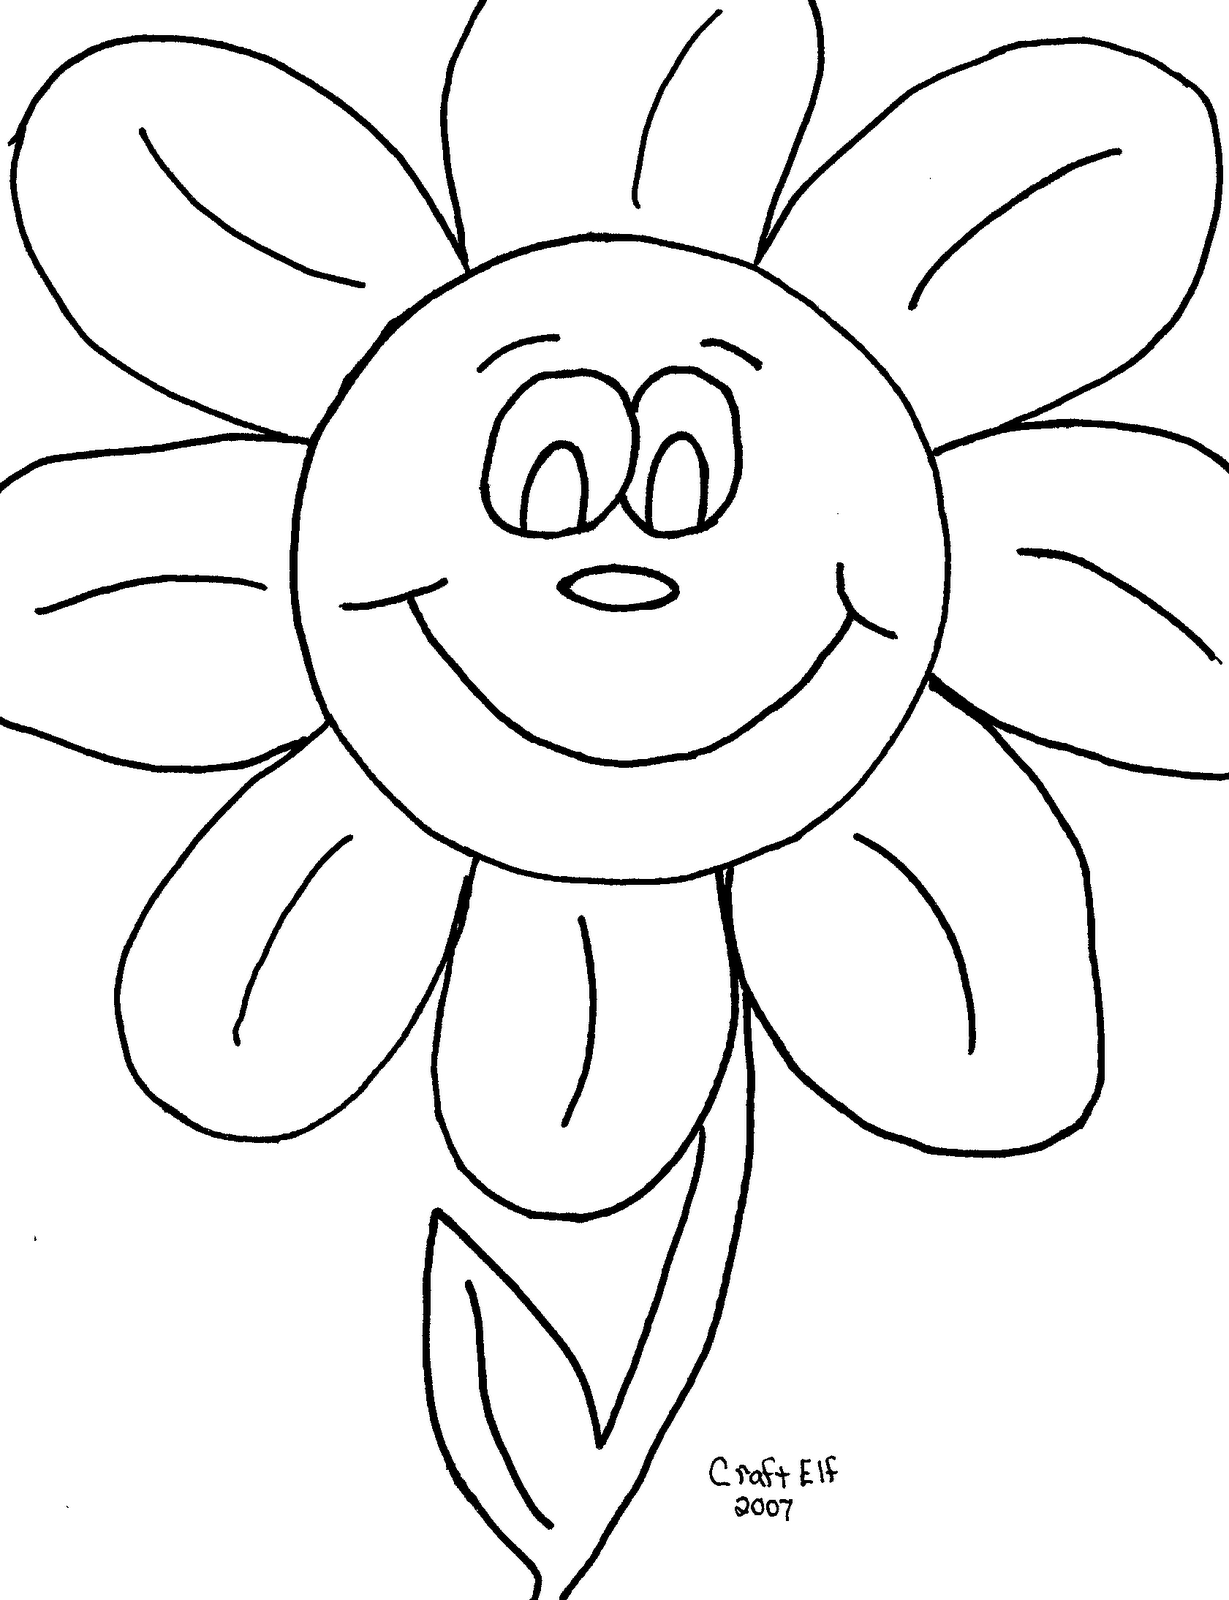 coloring-pages-kindergarten-coloring-pages-2010-collection